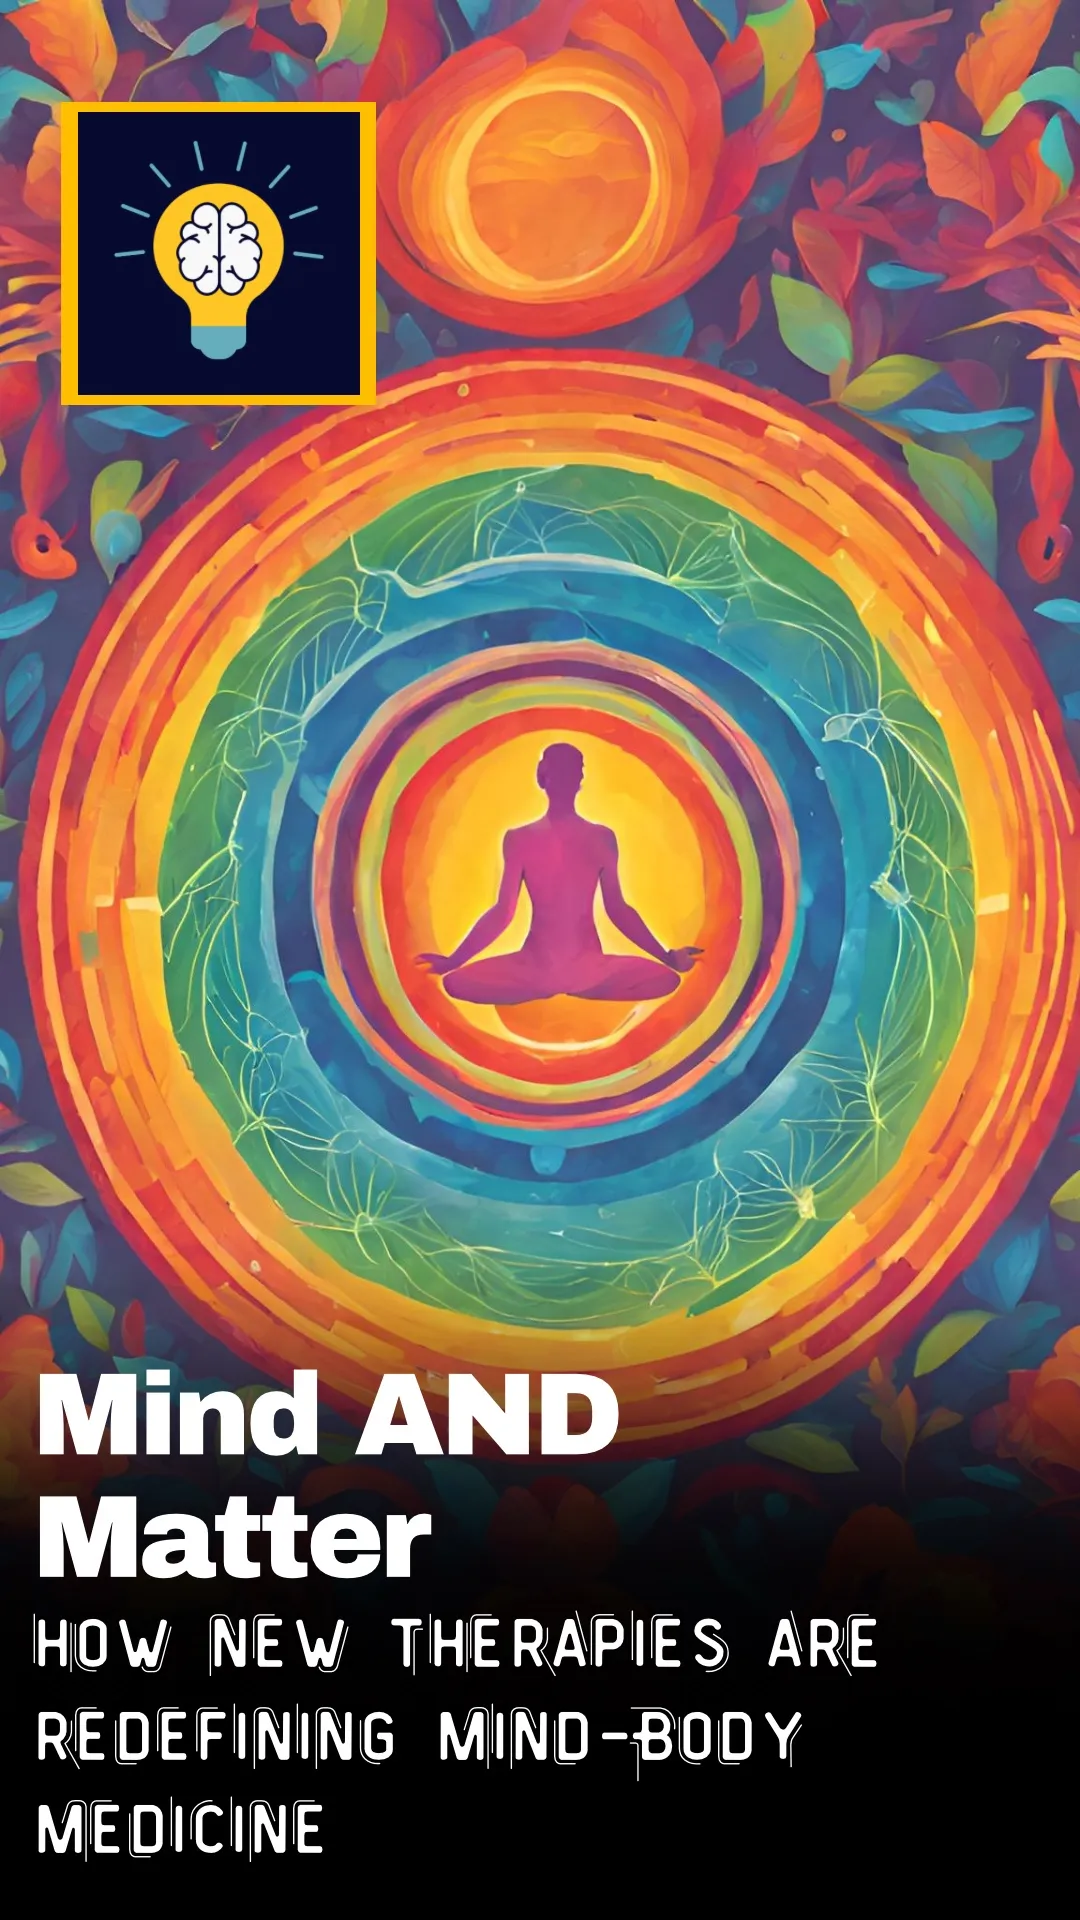 Mind AND Matter: How New Therapies are Redefining Mind-Body Medicine